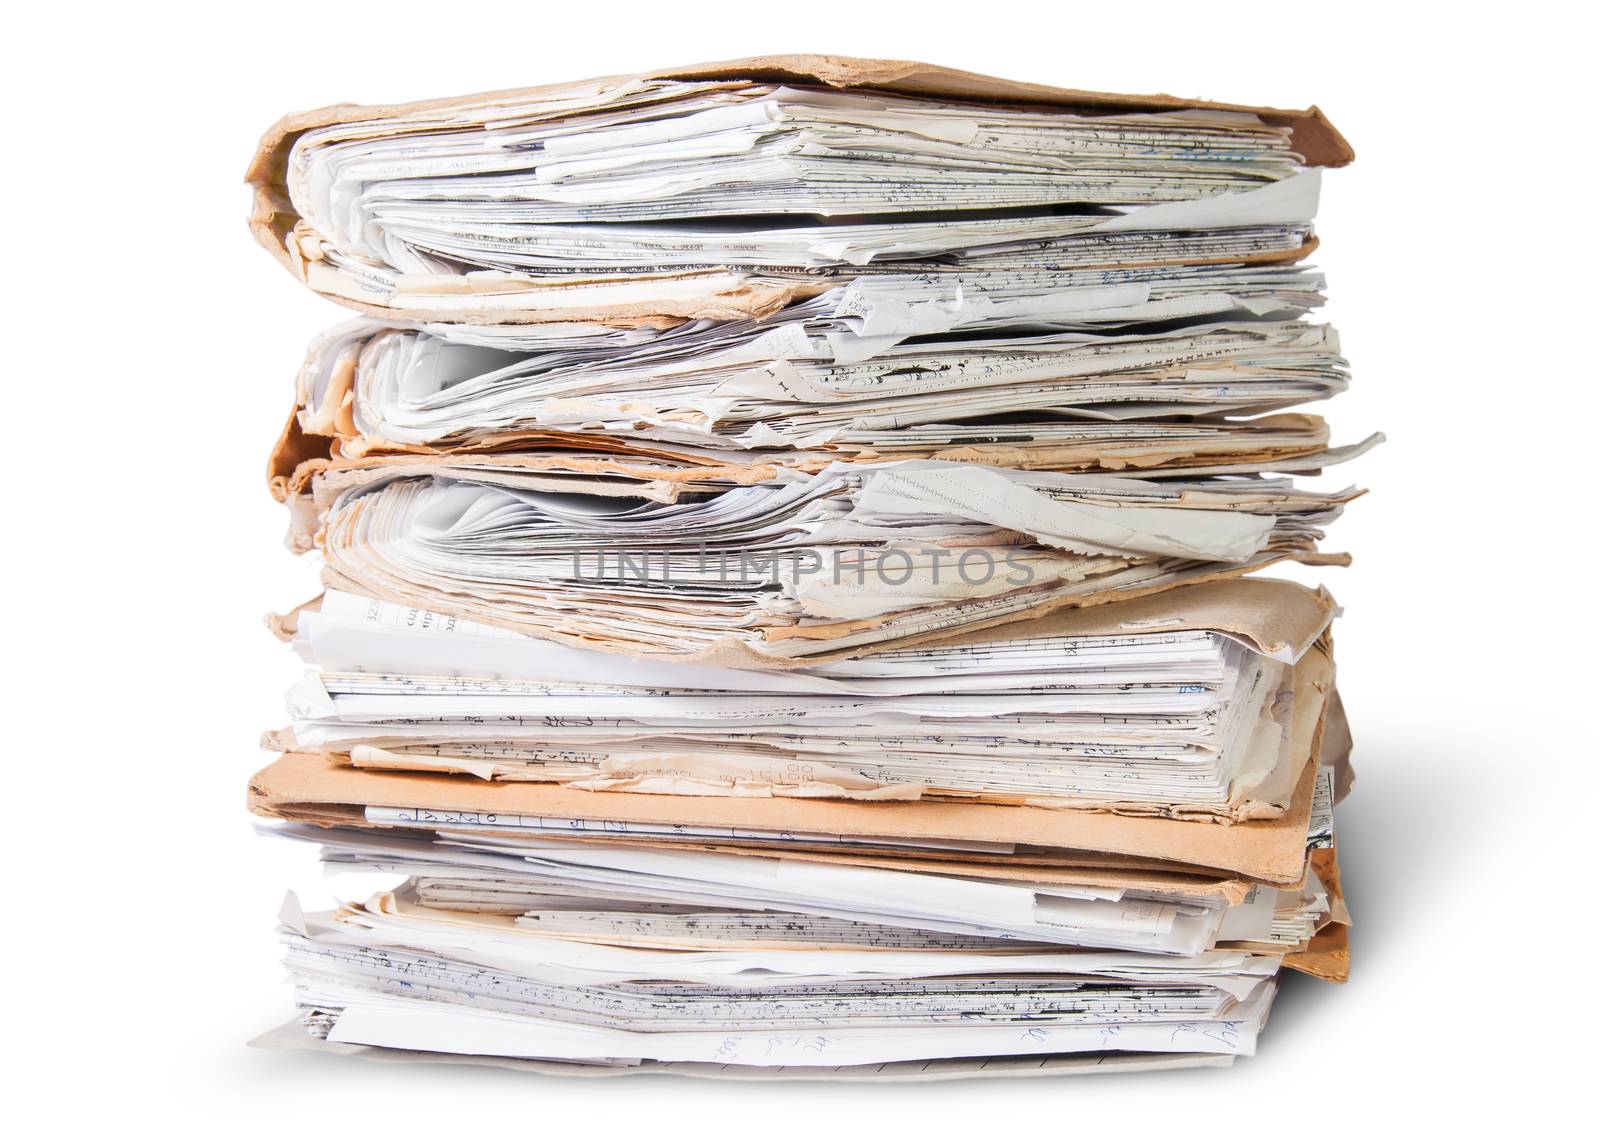 Old Files Stacking Up In A Messy Order Isolated On White Background